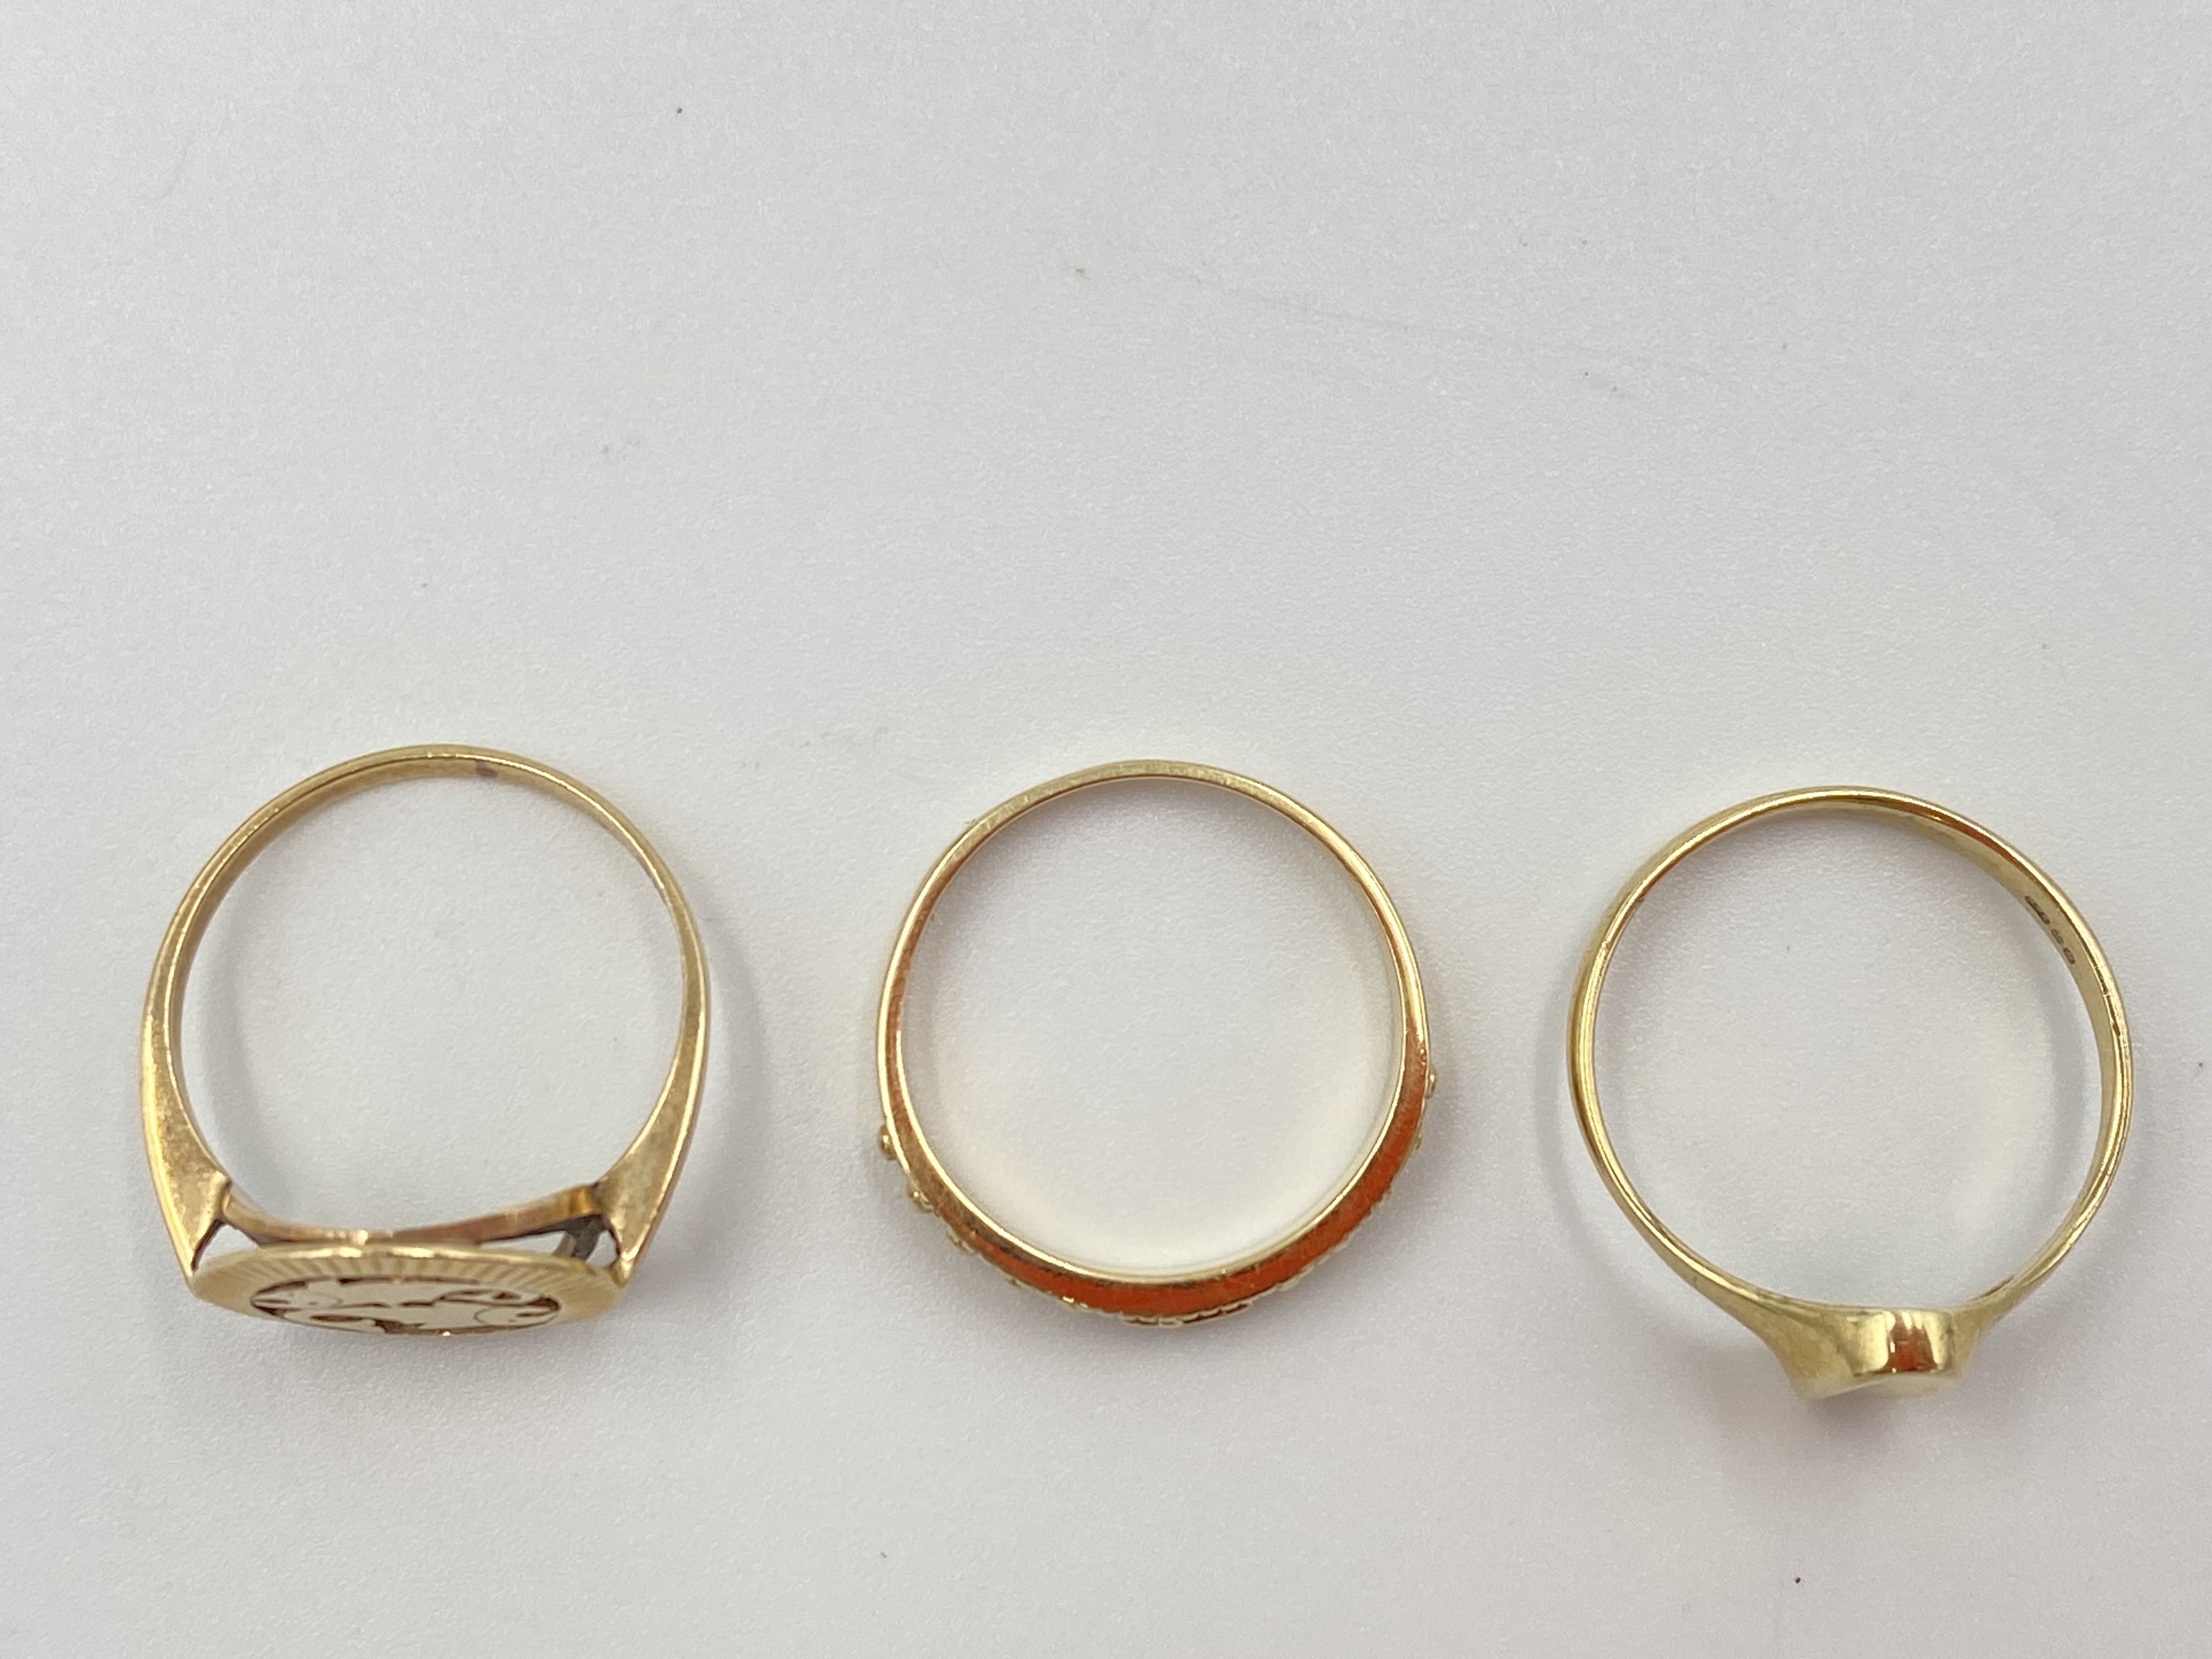 Three 9ct gold rings - Image 2 of 6